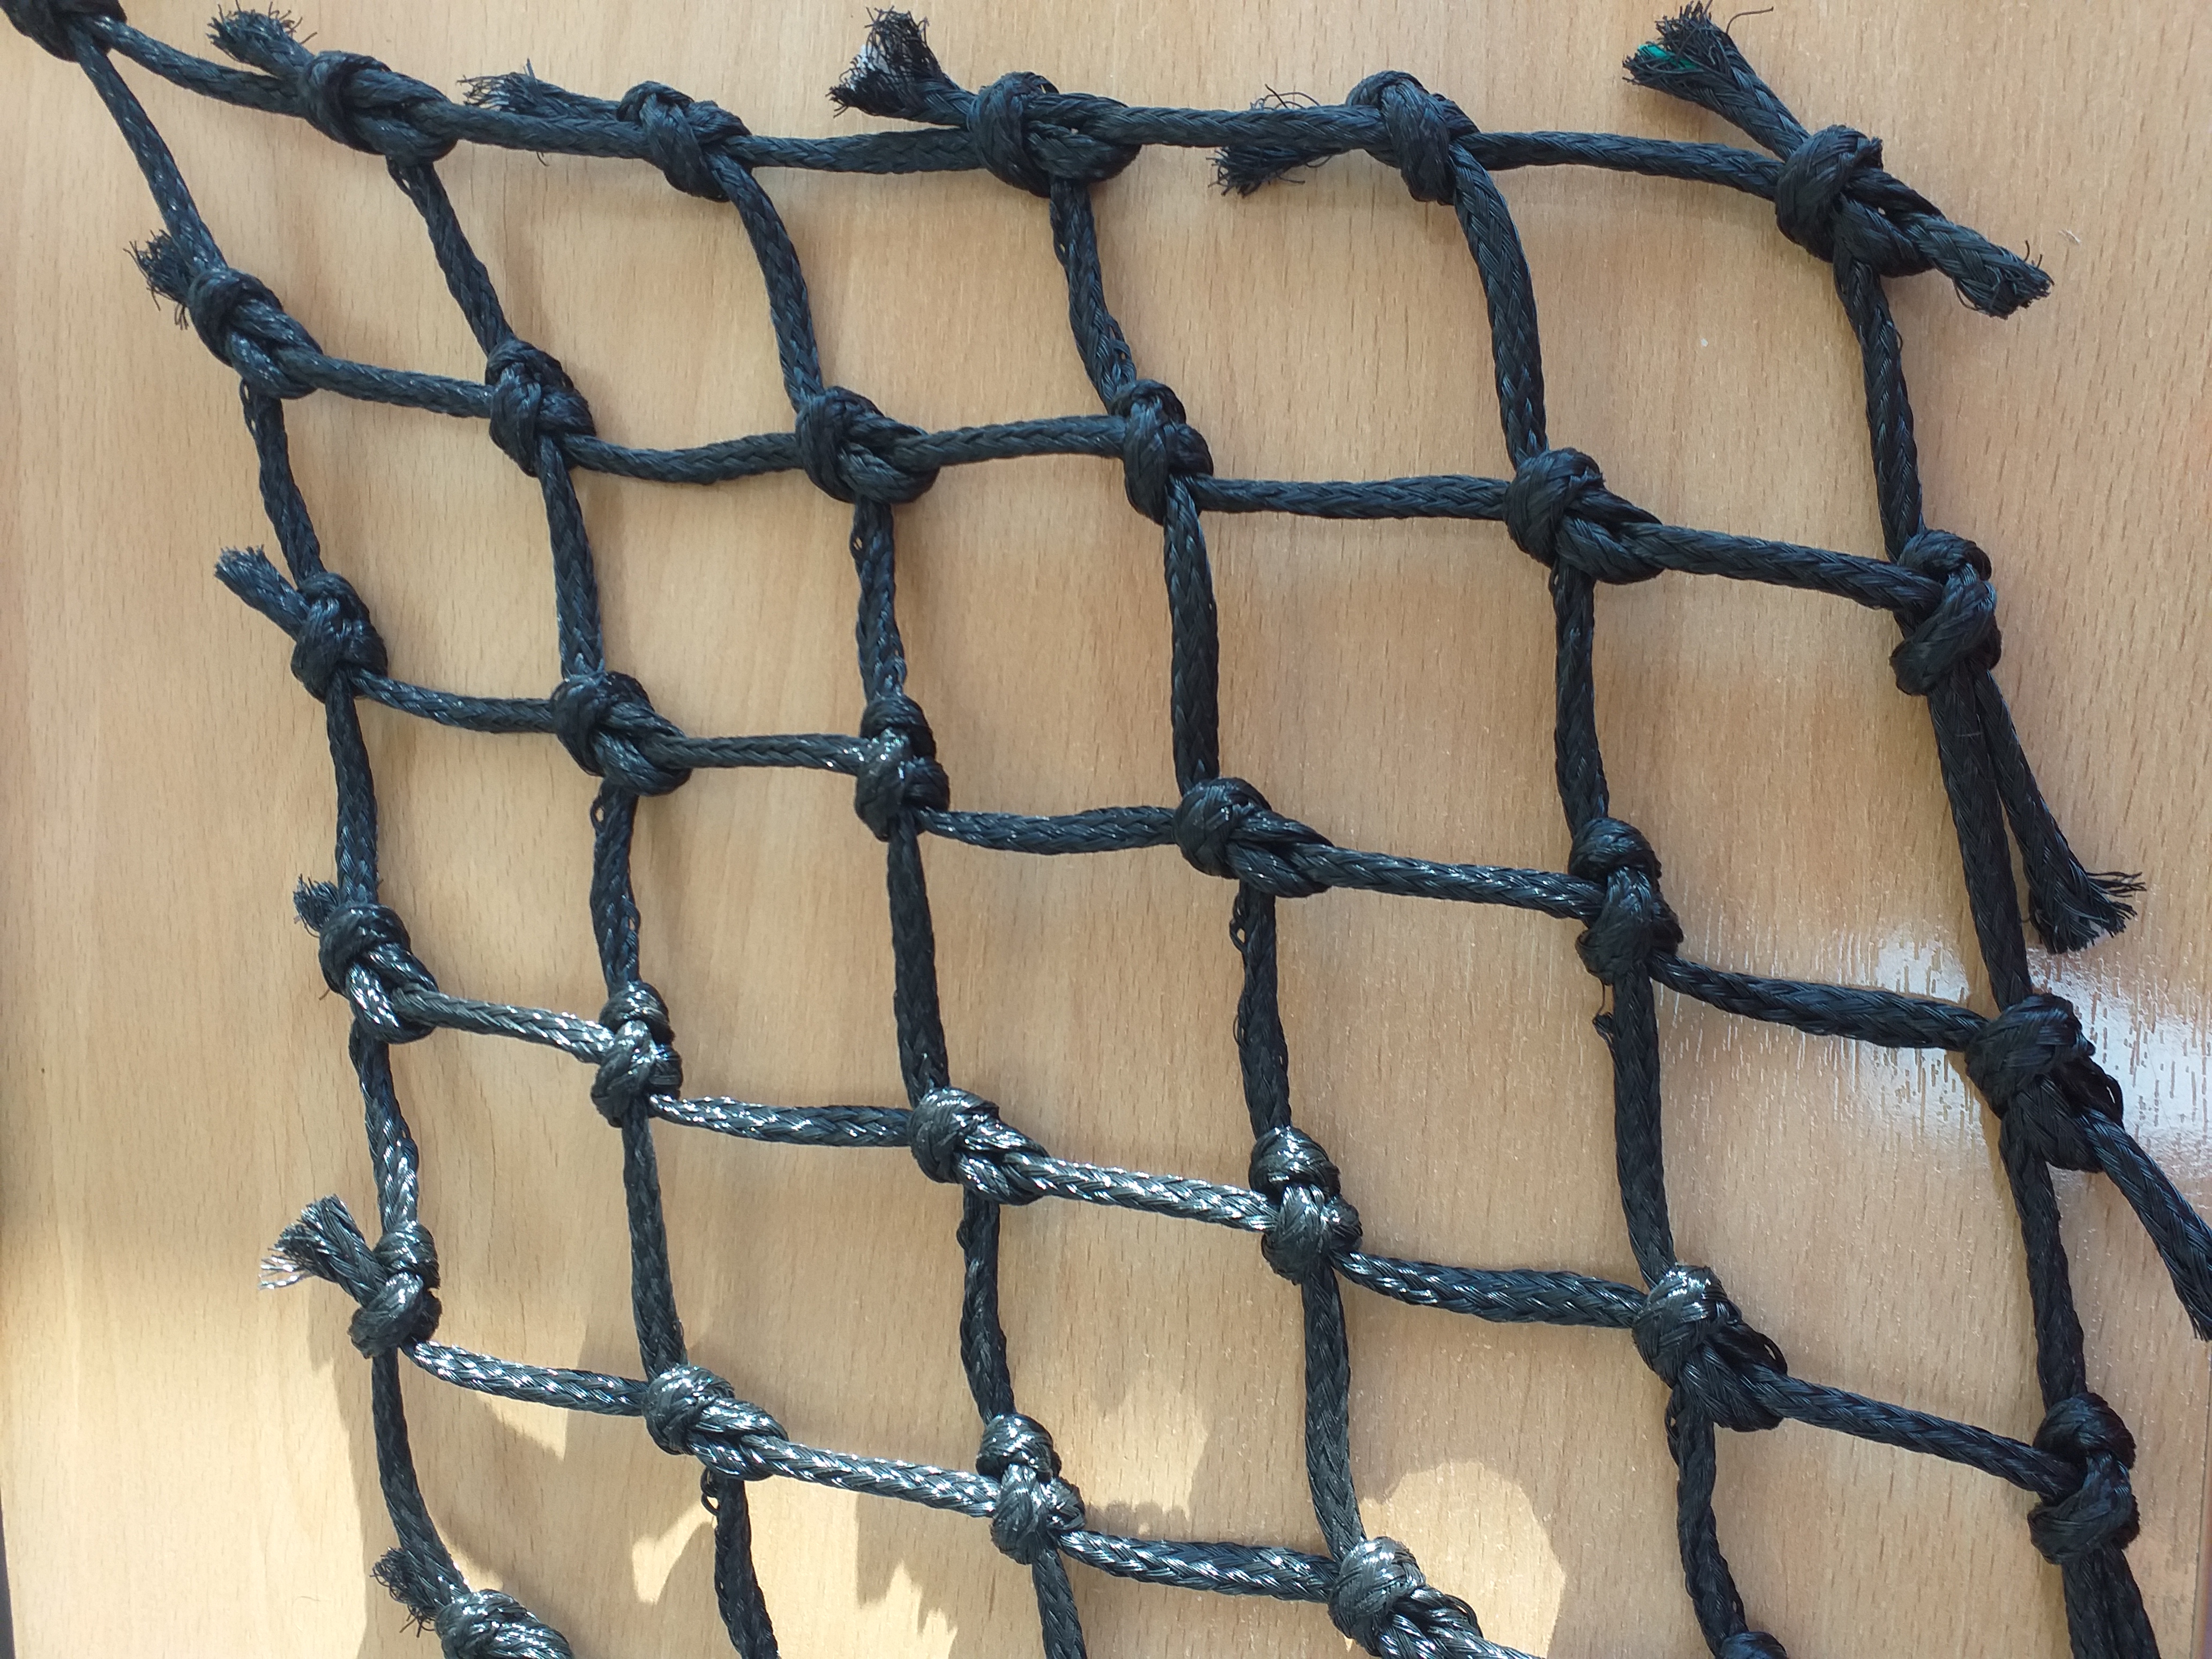 60mm x 6mm knotted black Netting 